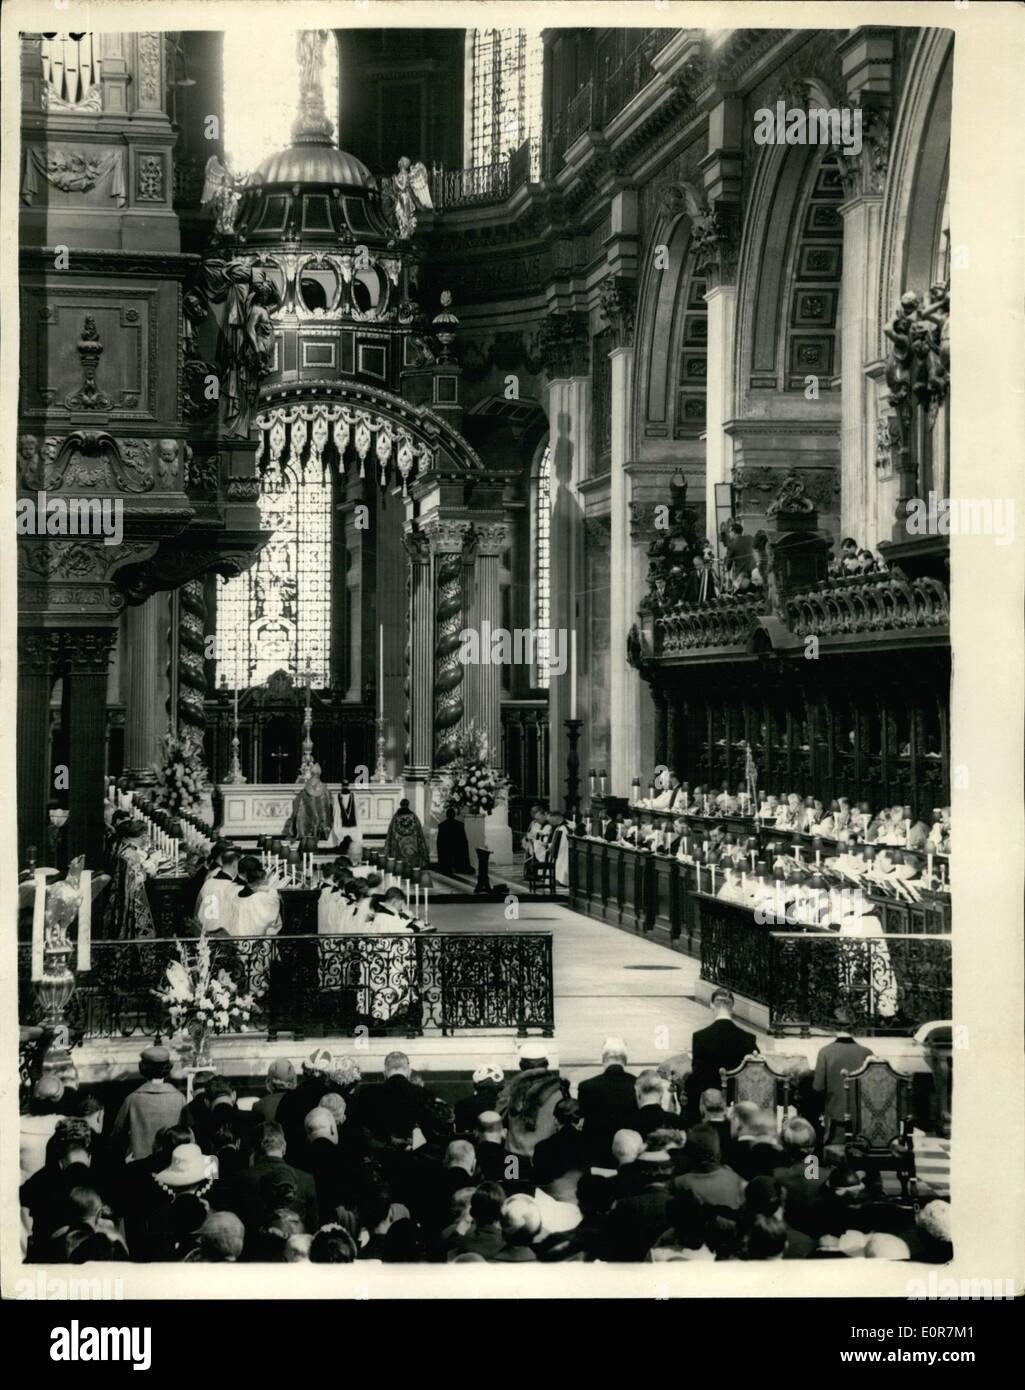 May 05, 1958 - Queen attends Dedication at St. Paul's: H. M. the Queen and the Duke of Edinburgh today attended a service for the re- dedication of the restored Eastern part of St. Paul's. Cathedral and the dedication of the new high altar as a memorial to the 235,451 men and women of the Commonwealth Overseas who died in the two world wars. Photo shows the scene in the Cathedral during the blessing by the Archbishop of Sanserbury showing the Queen and the Duke of Edinburgh seated at prayer. Stock Photo